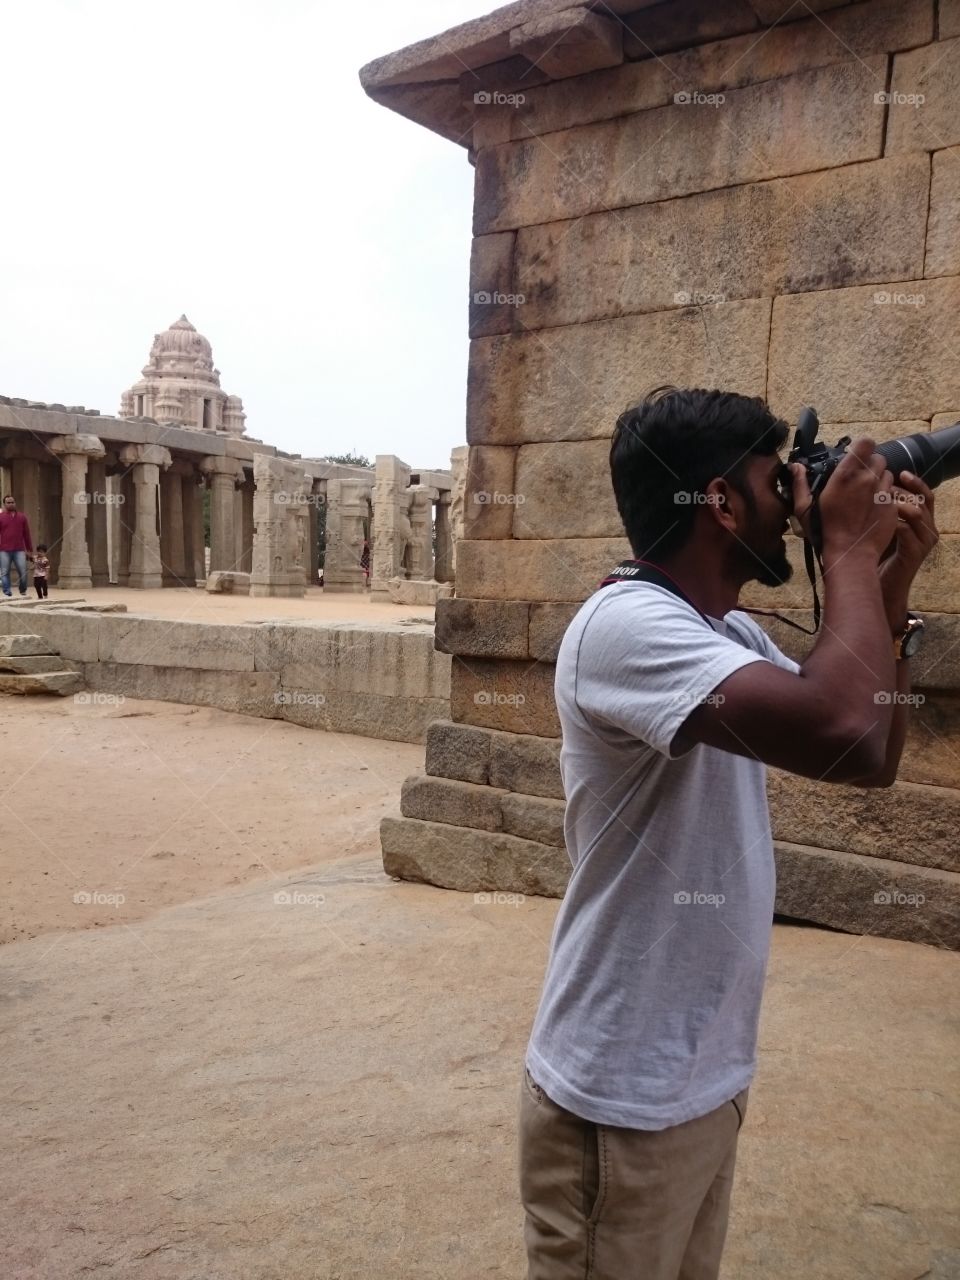 Photographer in action